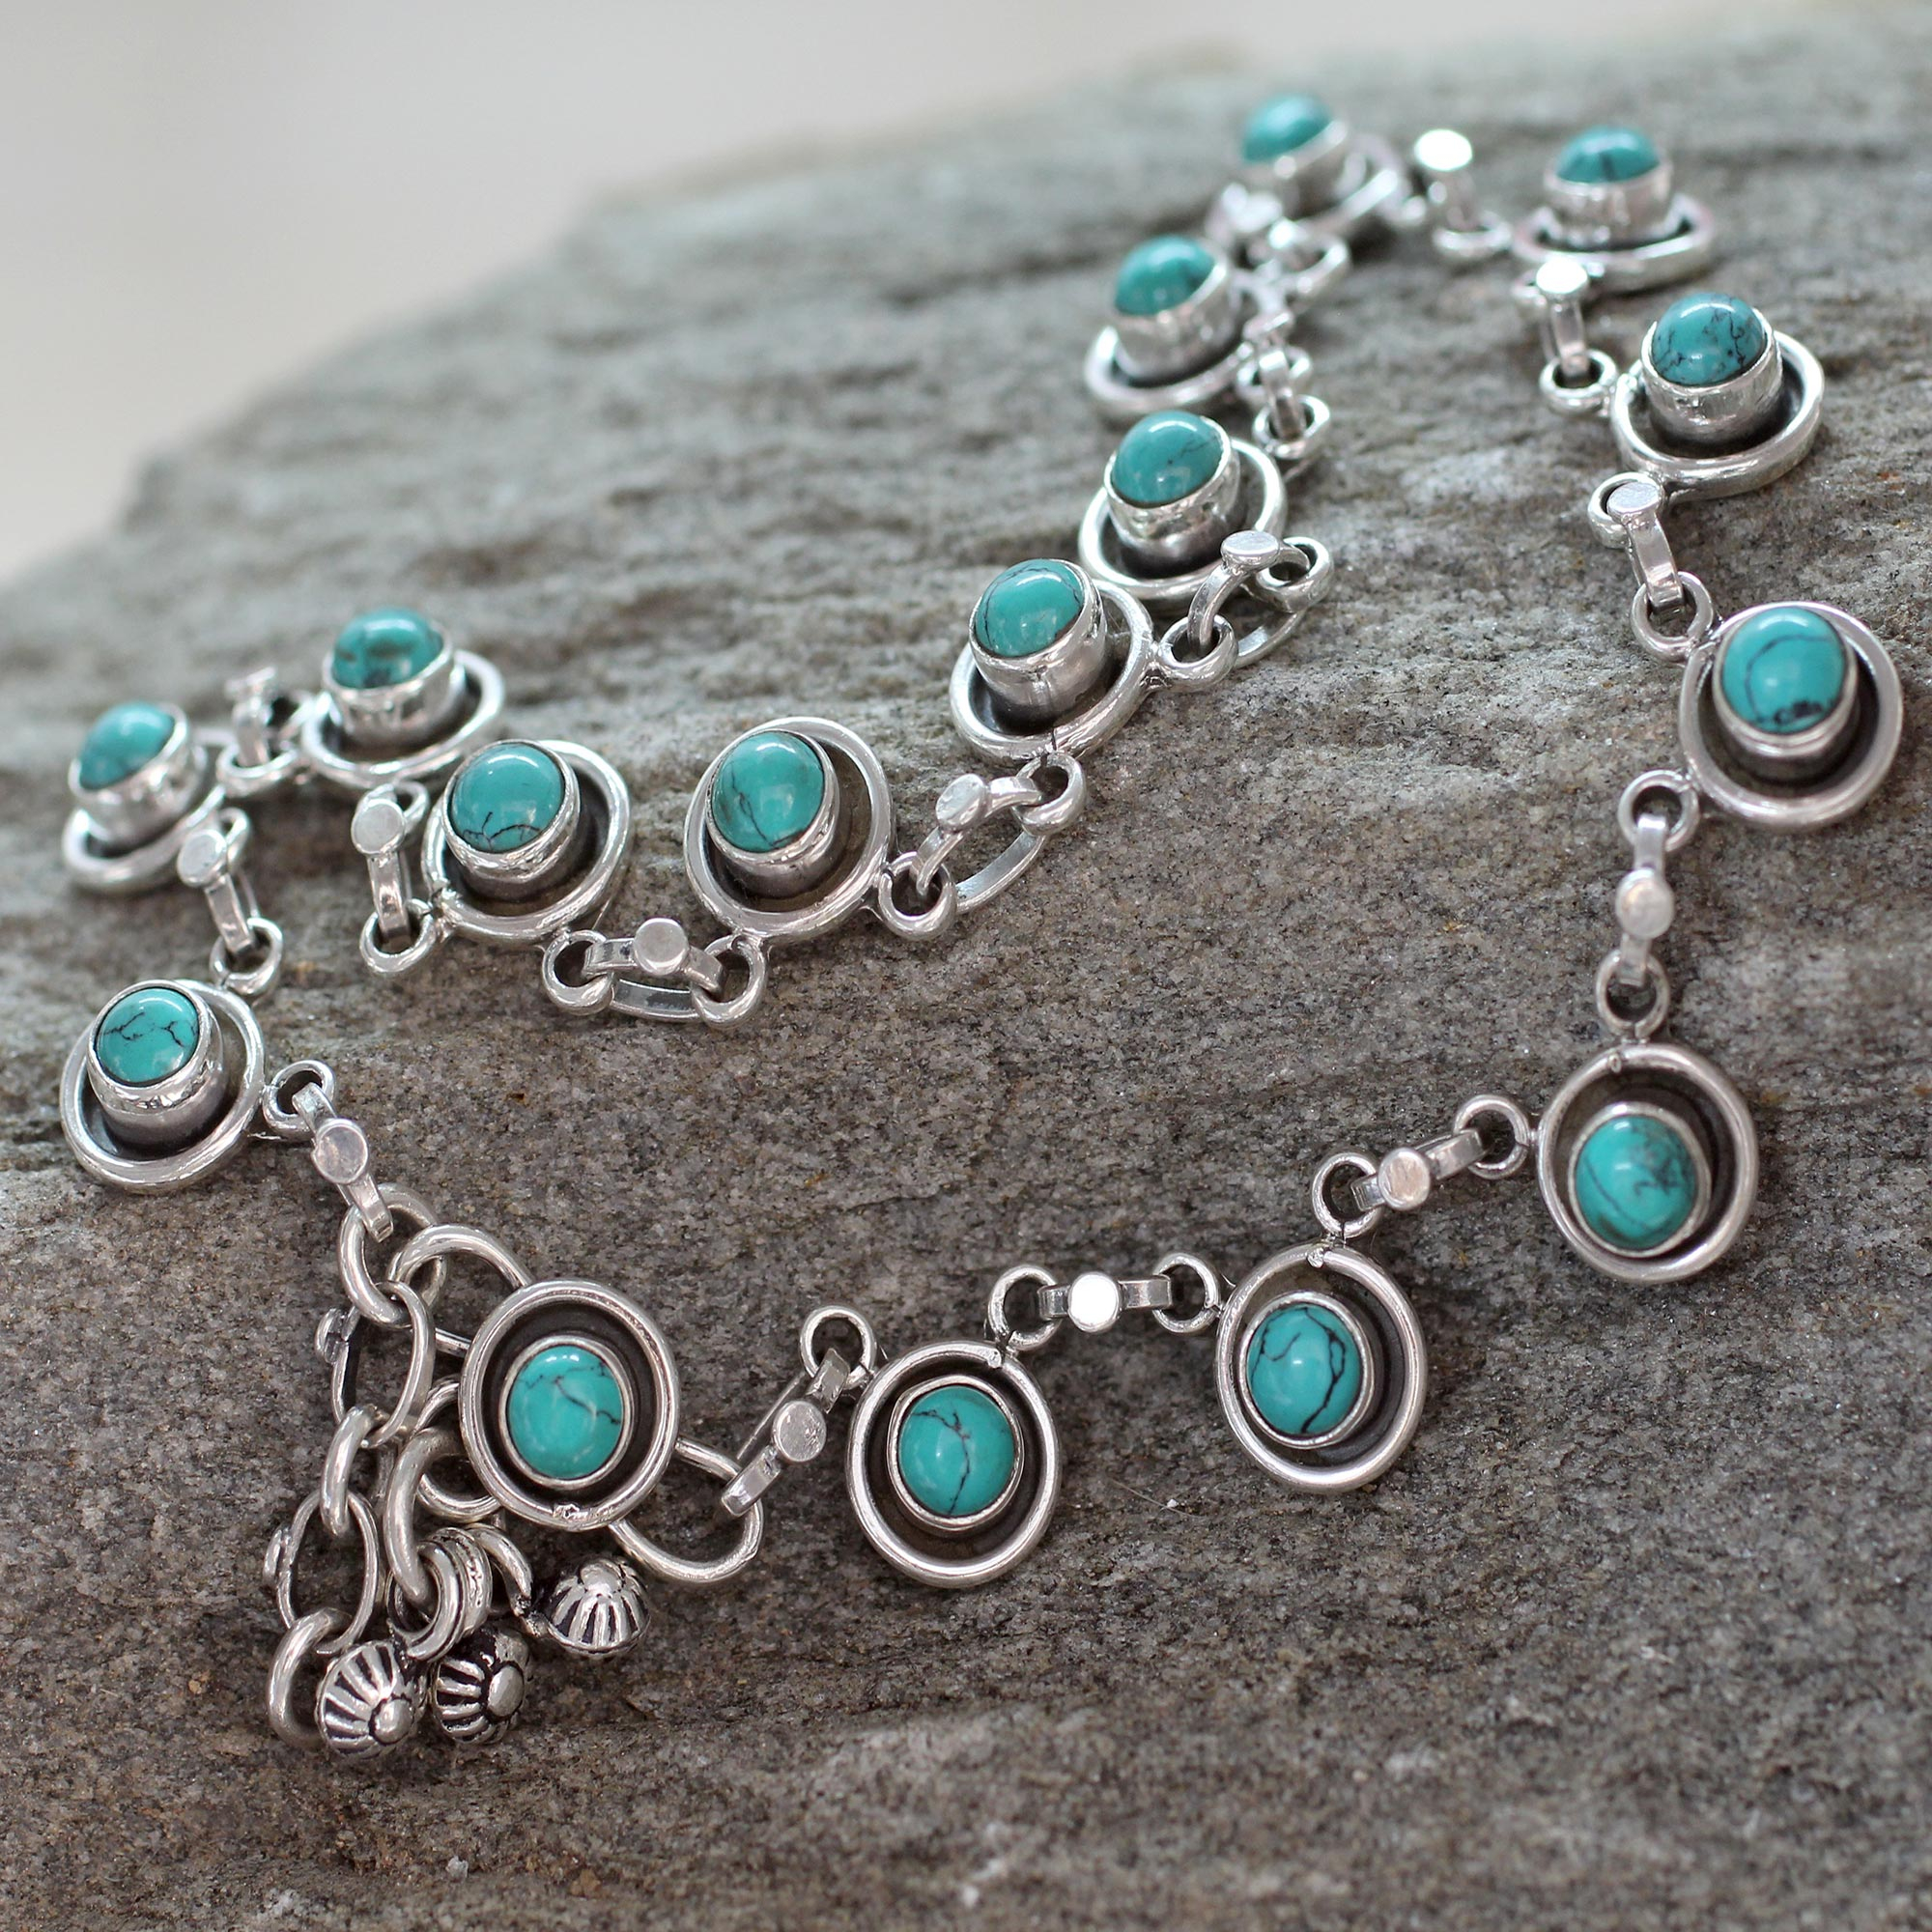 Fair Trade India Ankle Jewelry Turquoise and Sterling Silver - India ...